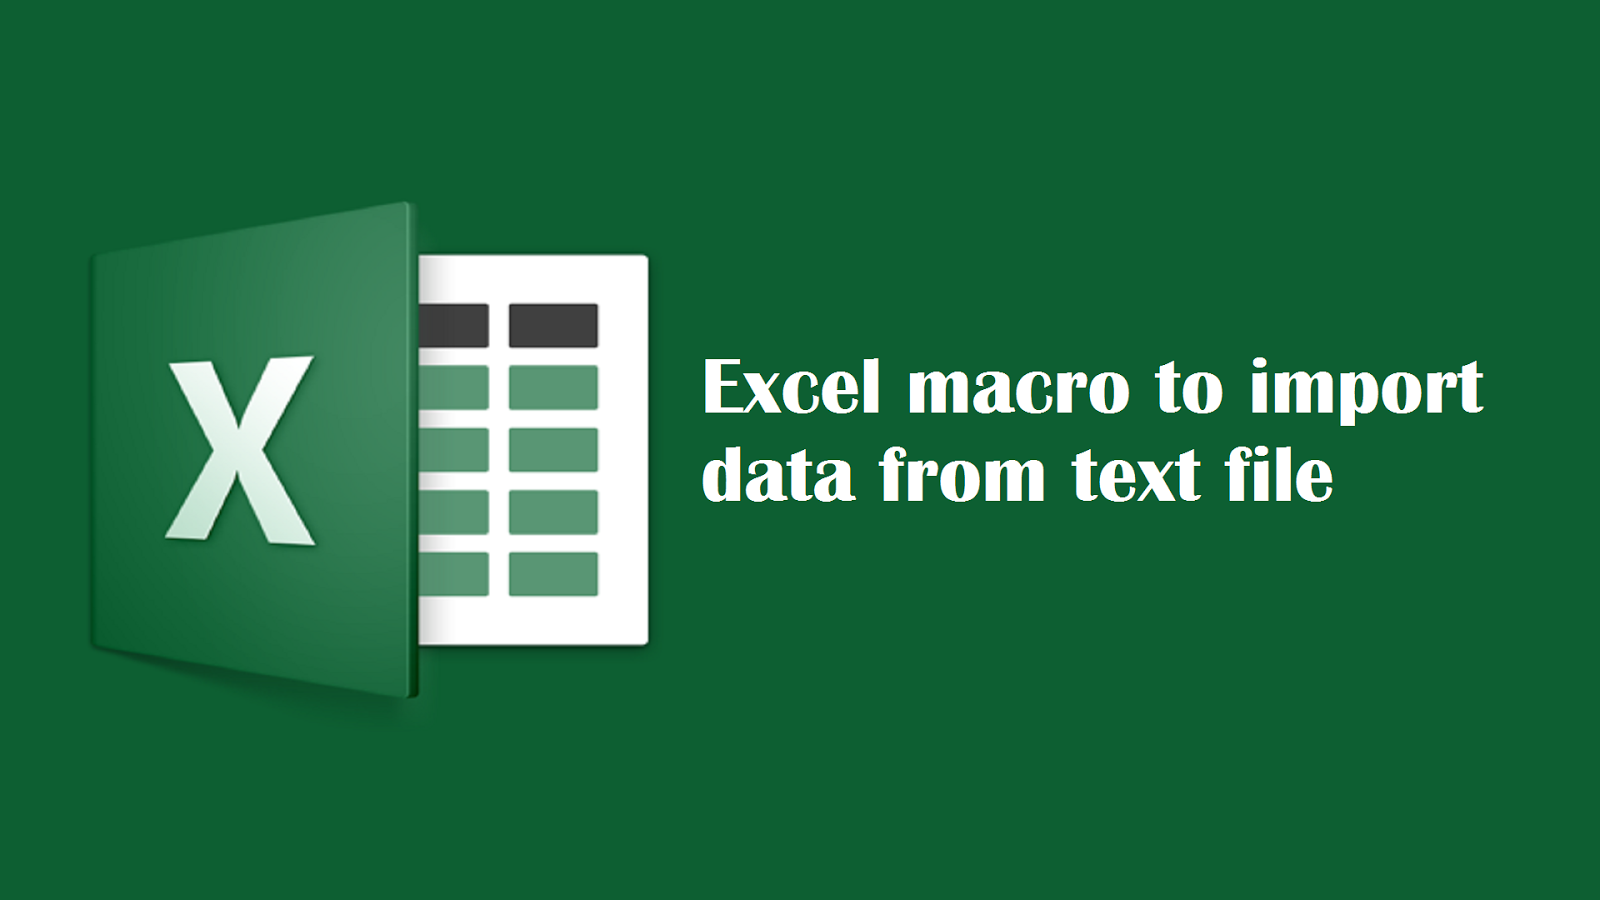 vba-tricks-and-tips-vba-code-to-import-data-from-text-file